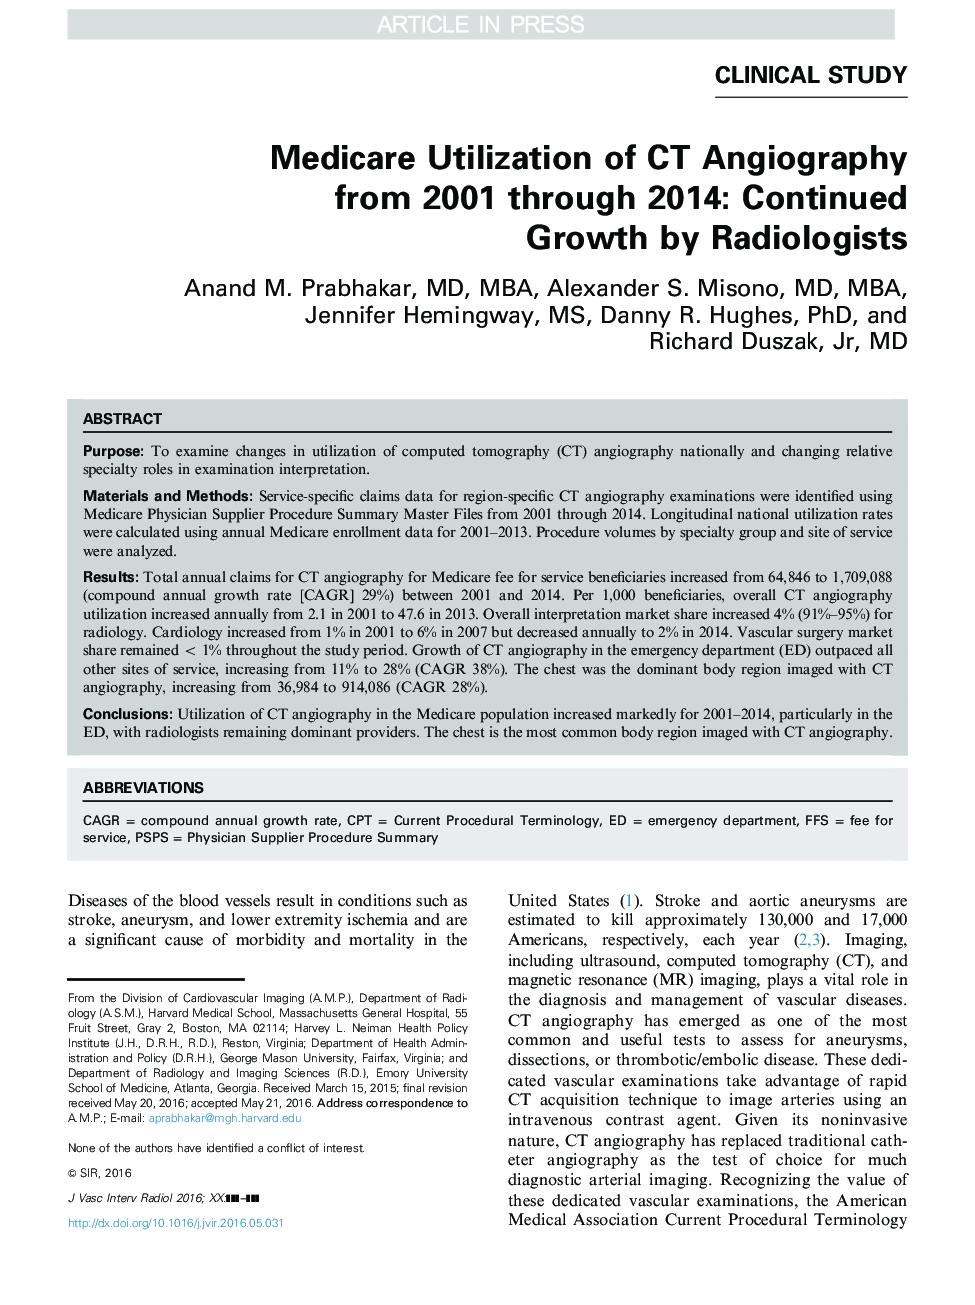 Medicare Utilization of CT Angiography from 2001 through 2014: Continued Growth by Radiologists